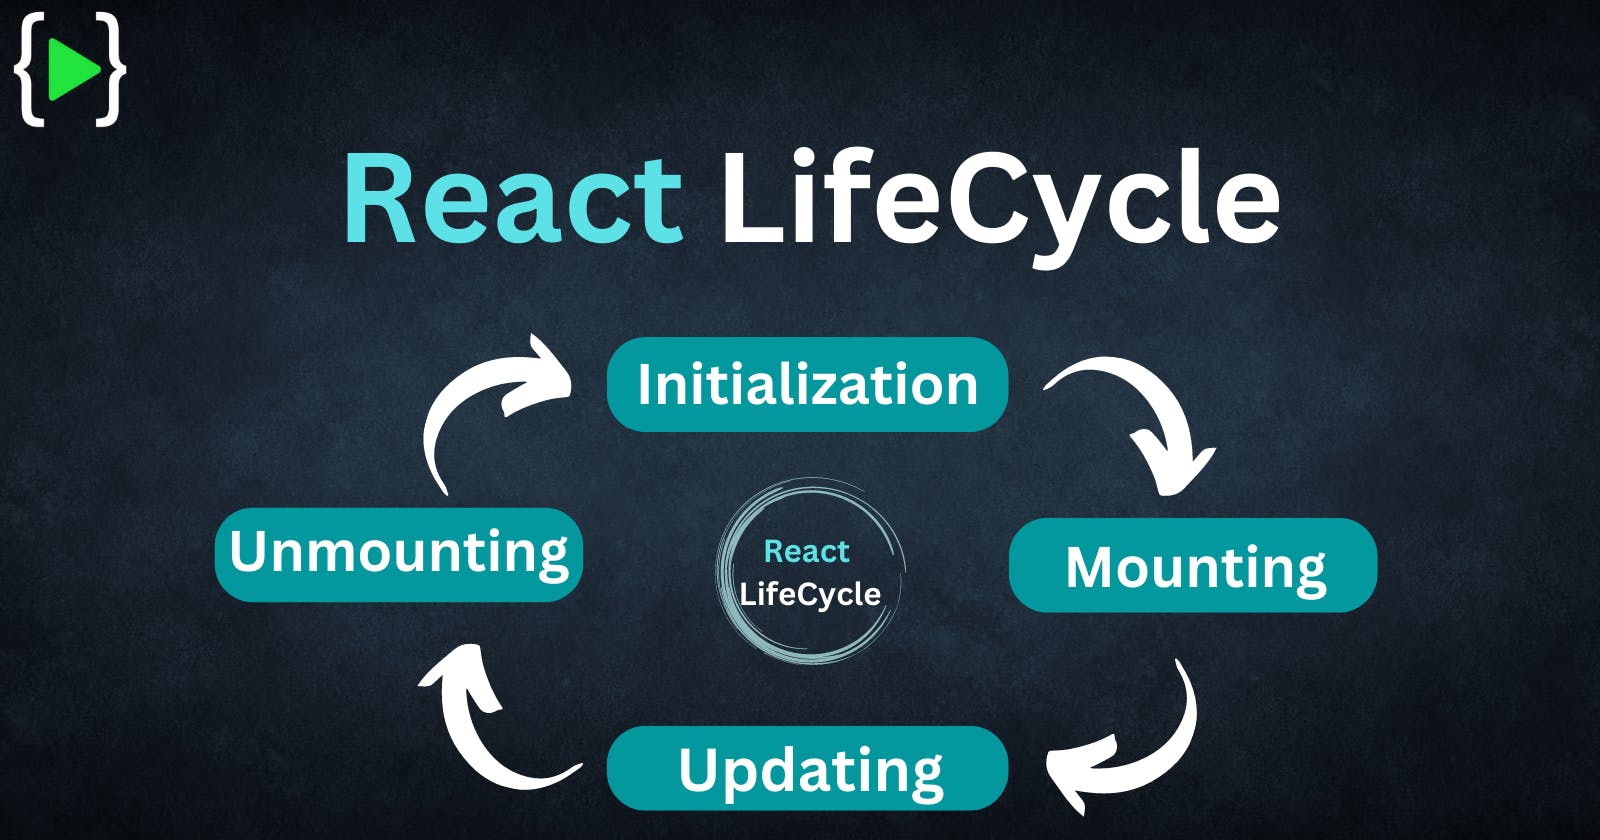 ⚛️  | React Lifecycle | ⚛️
Initialization, Mounting, Updating & Unmounting